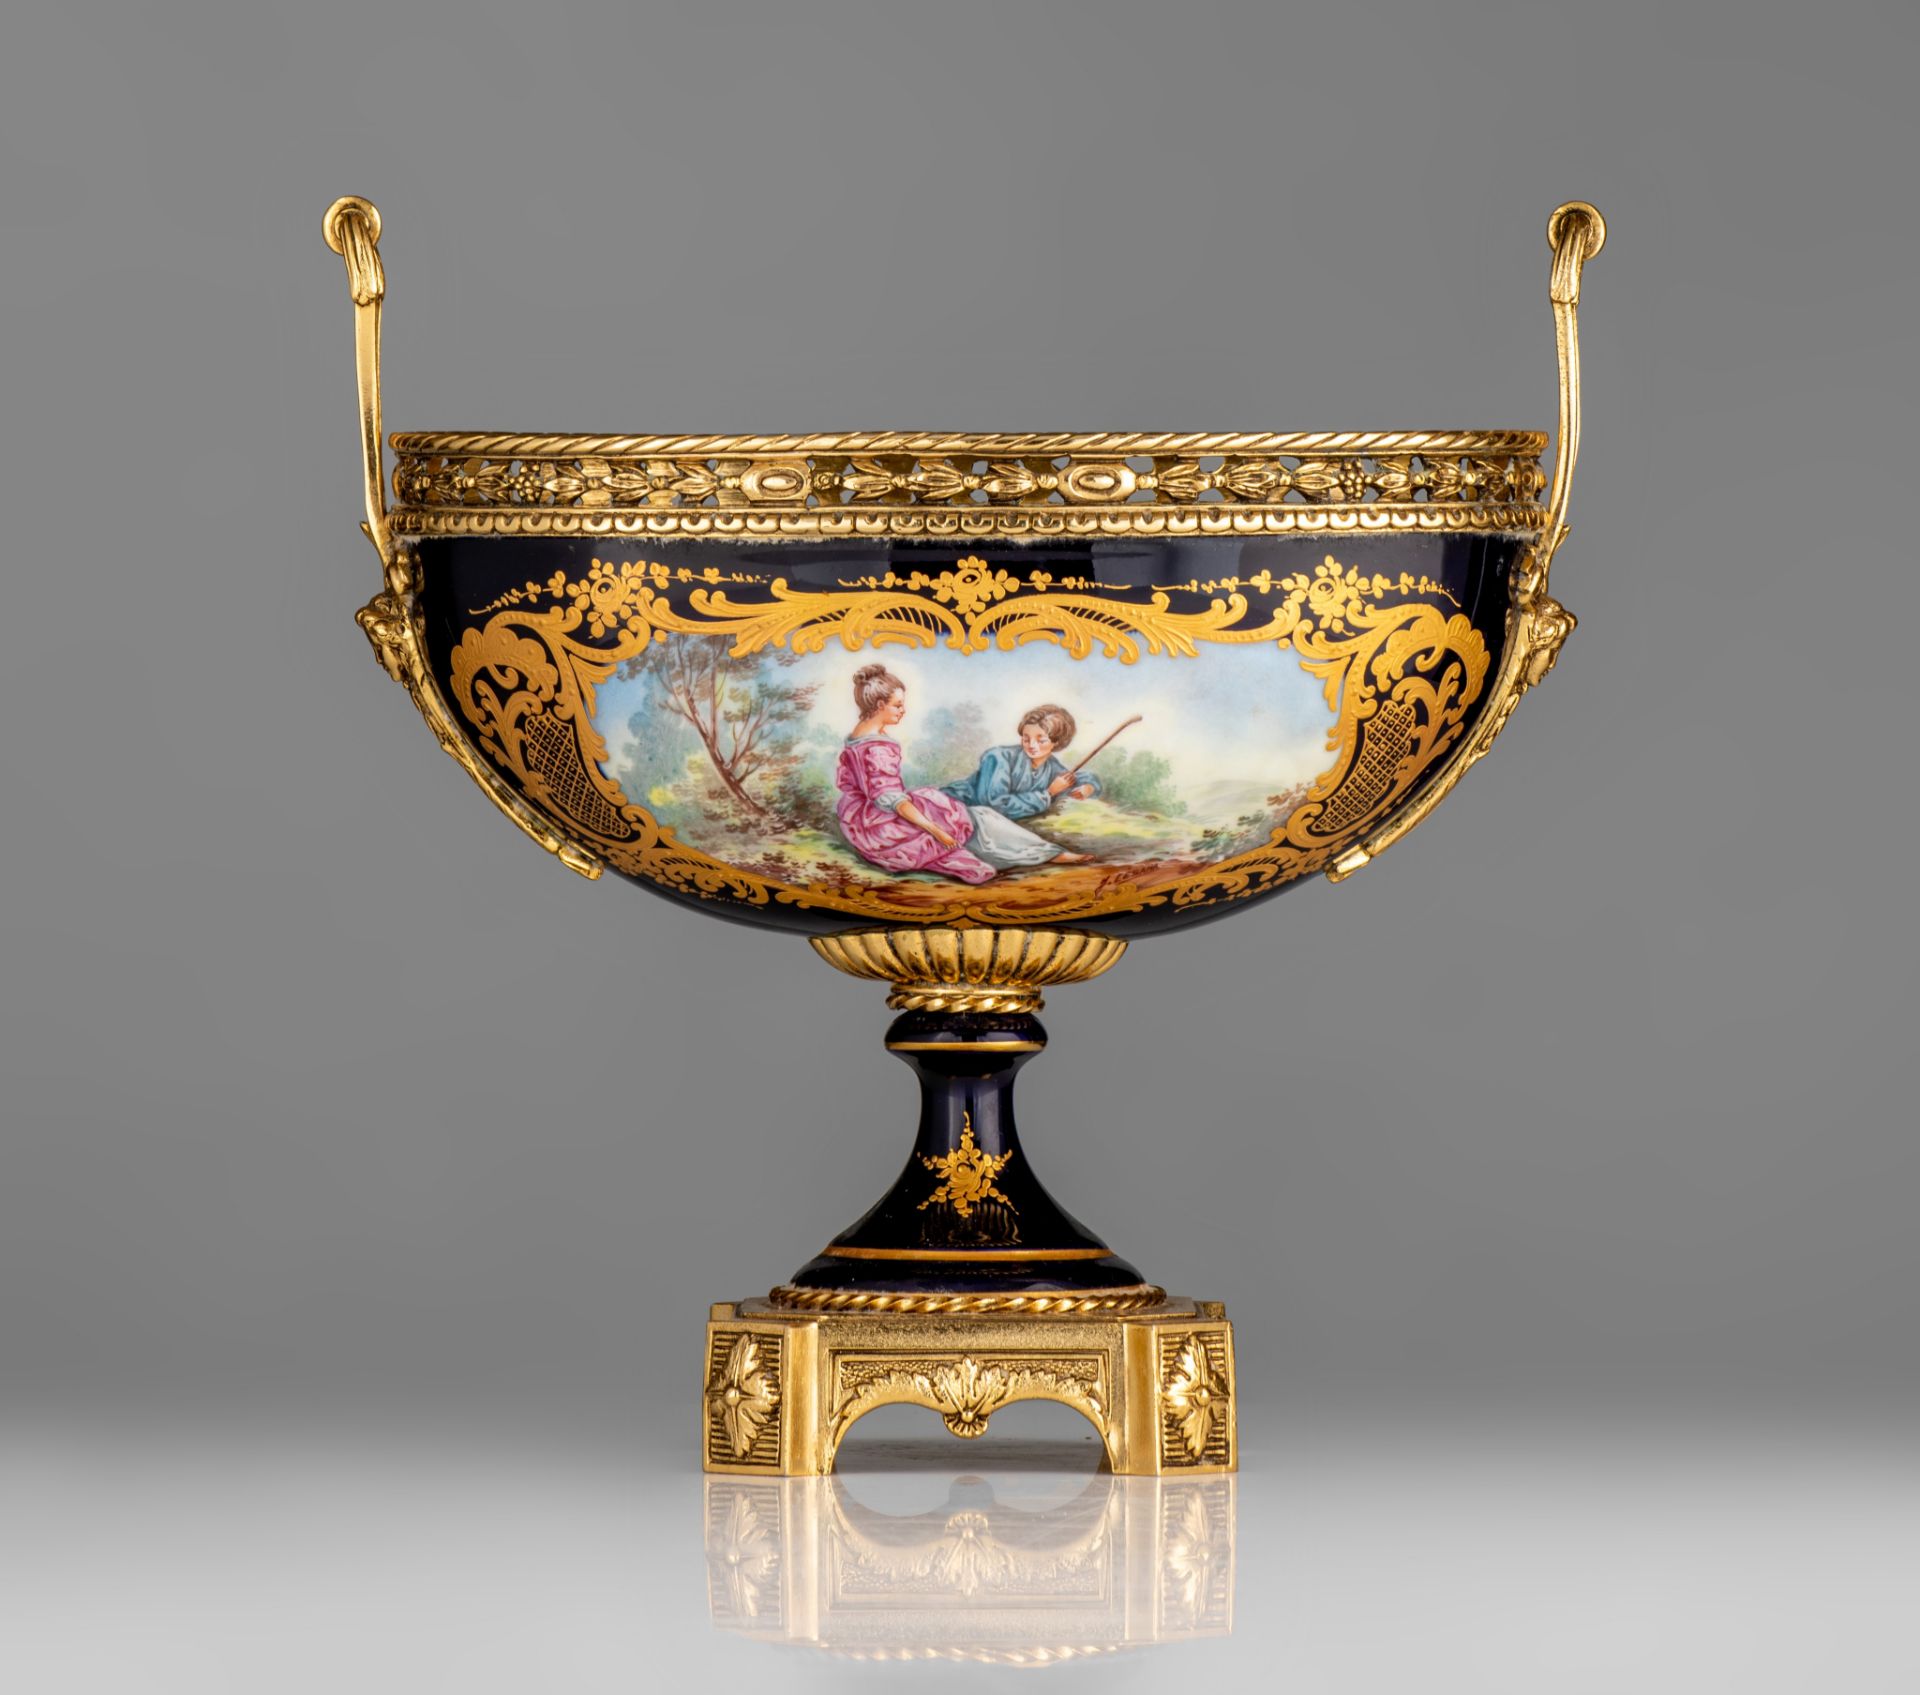 A three-piece Sèvres garniture set, decorated with gallant scenes, signed 'J. Césana', H 28,5 - 42,5 - Image 2 of 15